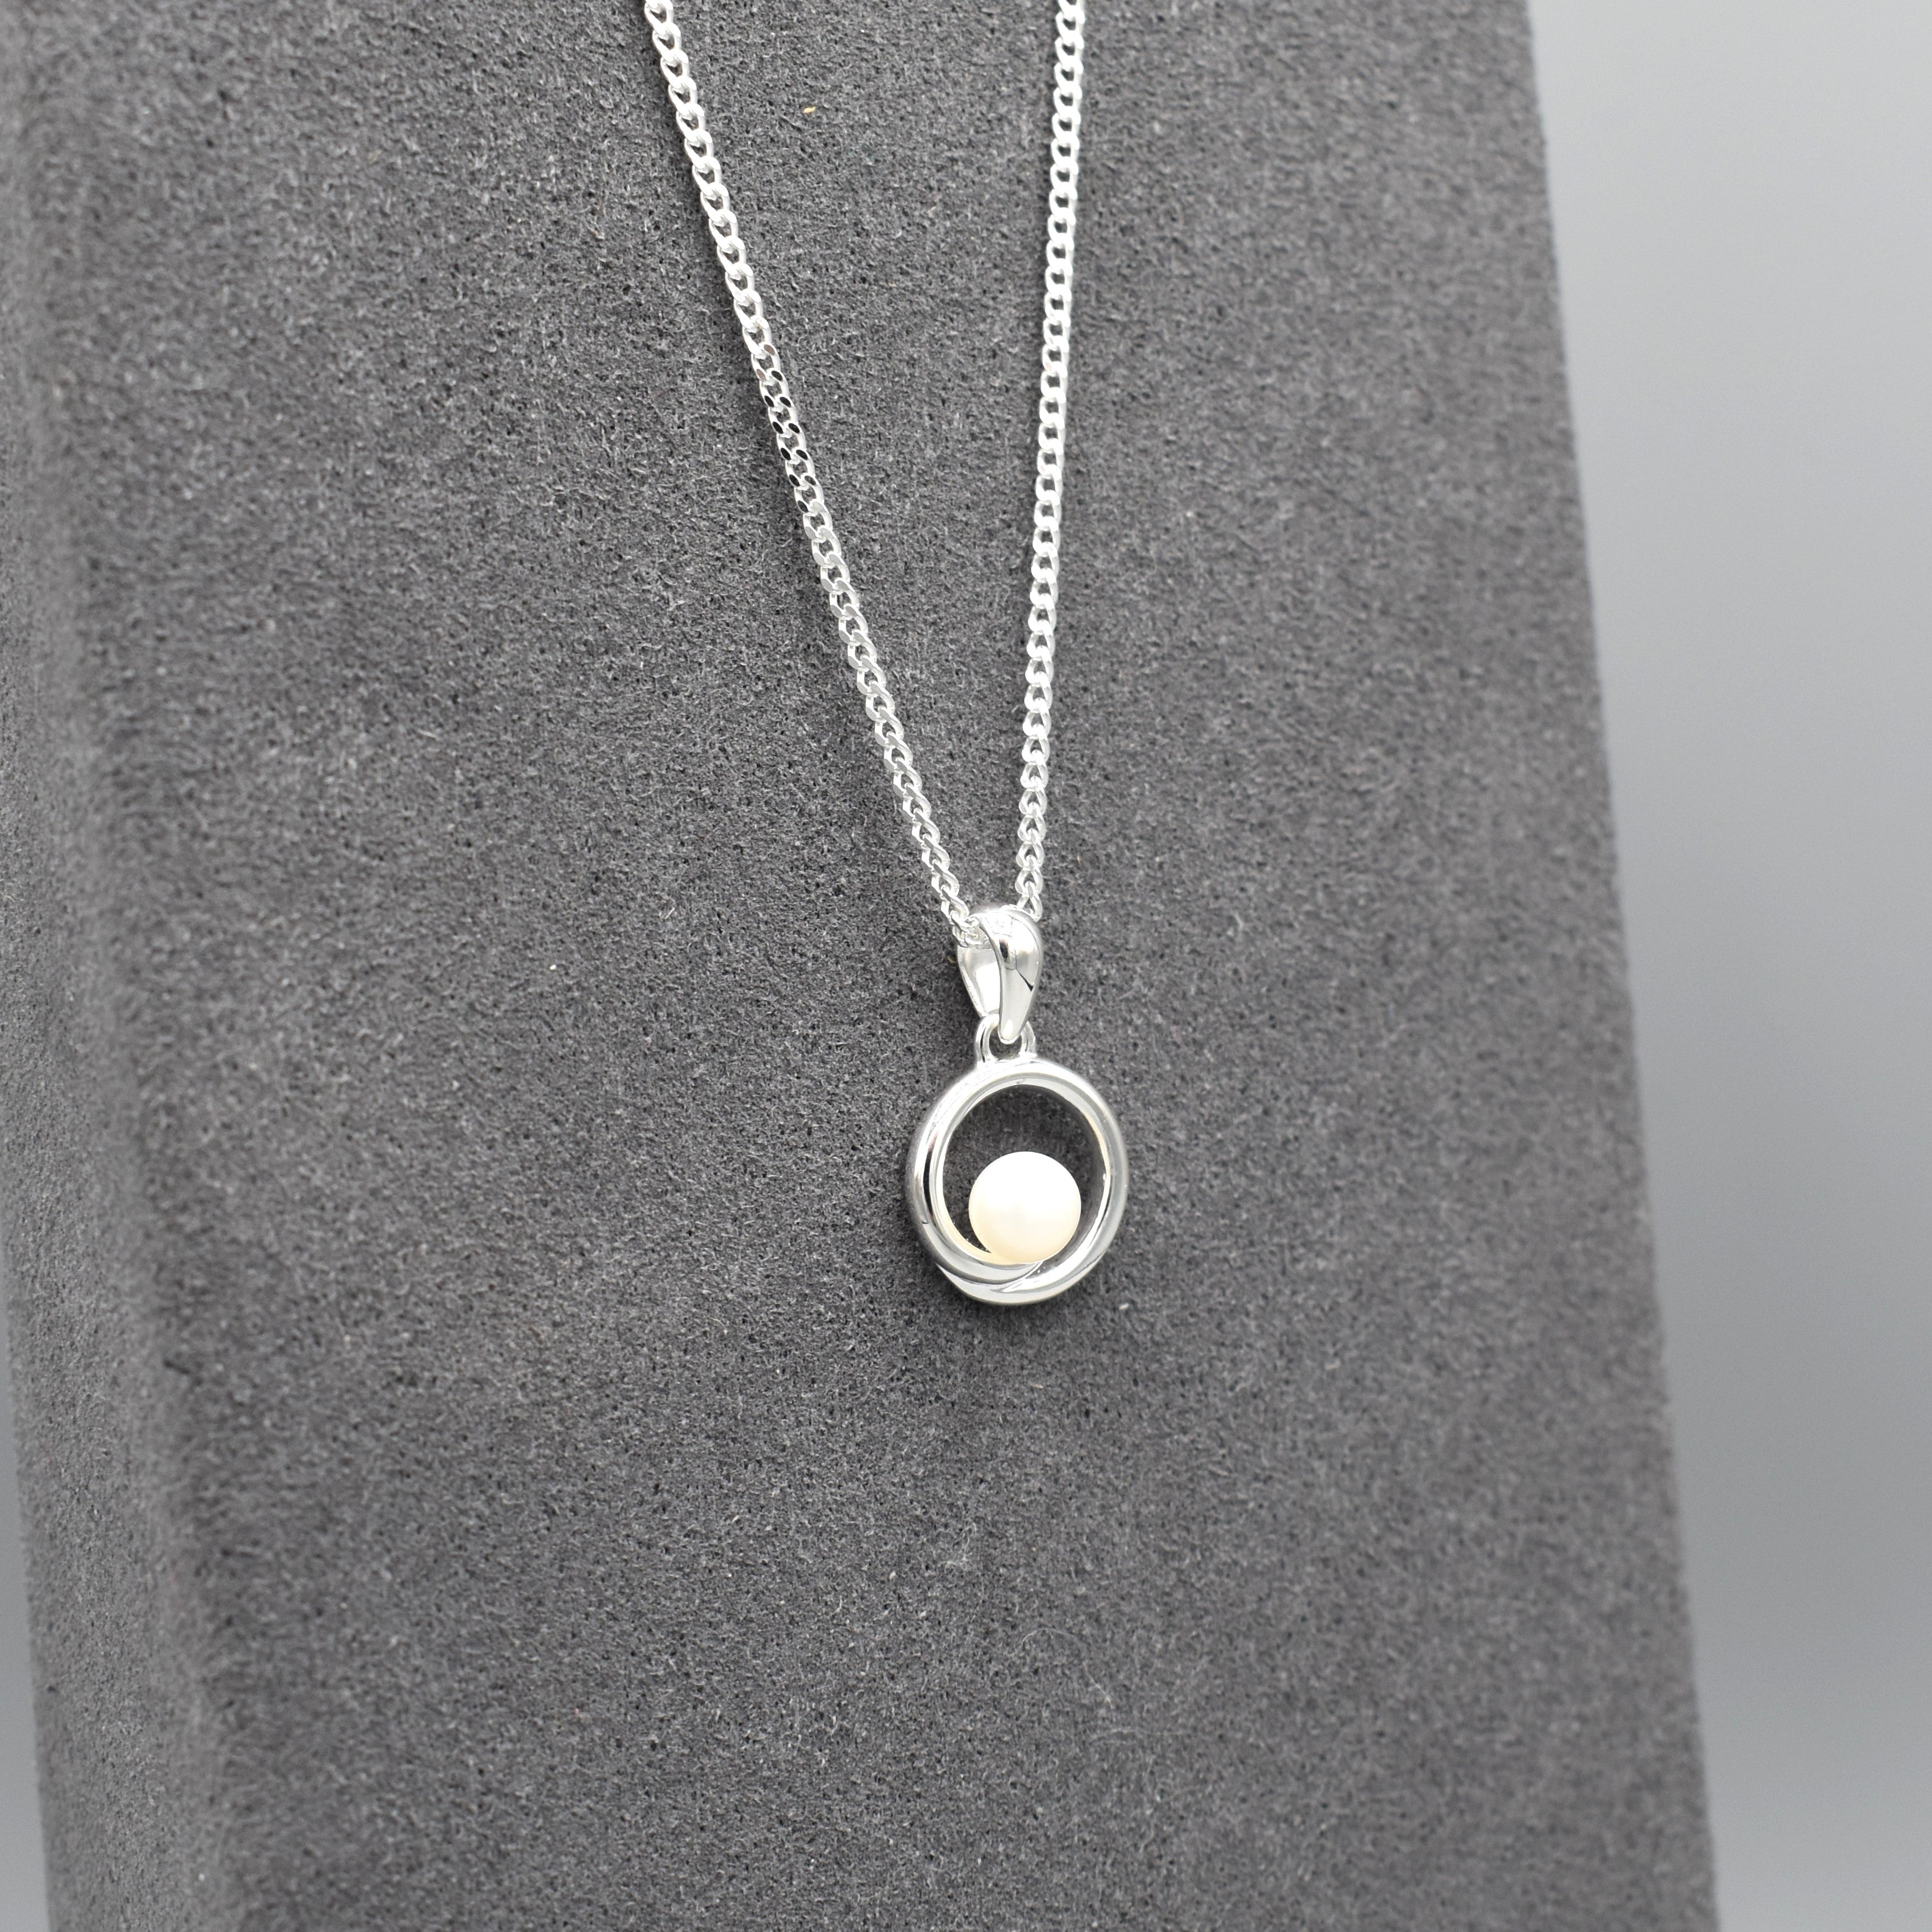 Silver Circle Swirl with Pearl Pendant